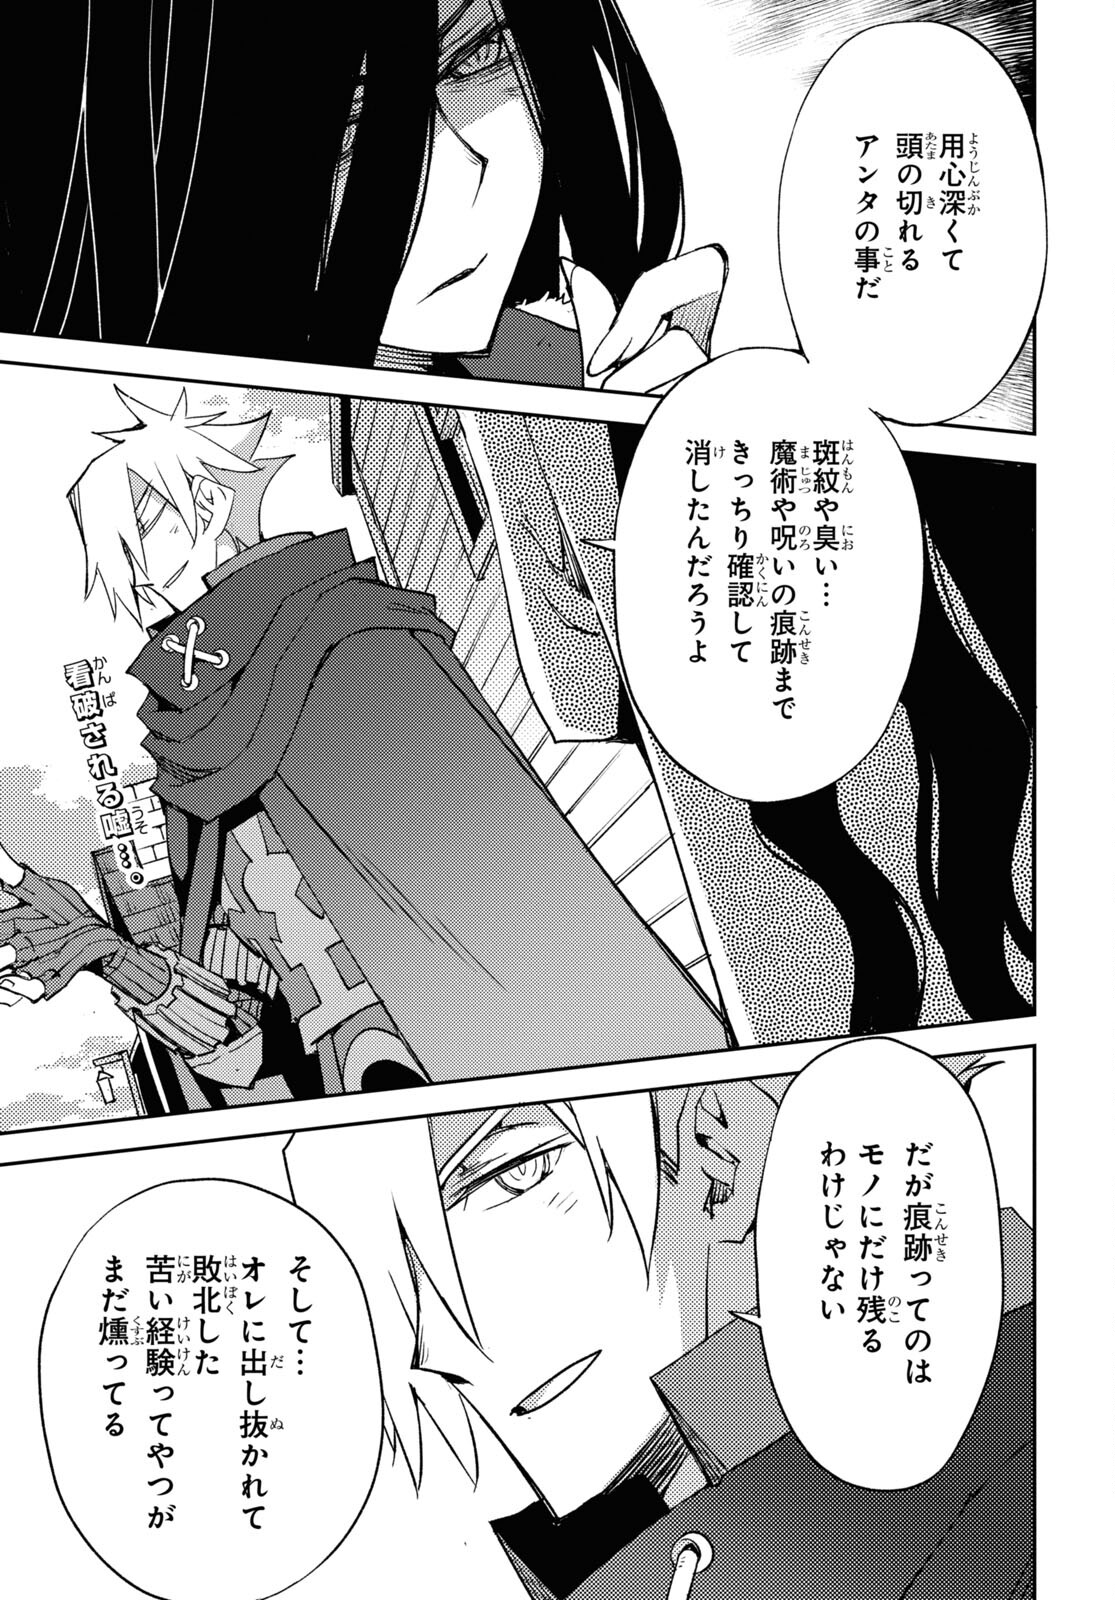 Fate/Grand Order -Epic of Remnant- 亜種特異点IV 禁忌降臨庭園 セイレム 異端なるセイレム 第38話 - Page 3